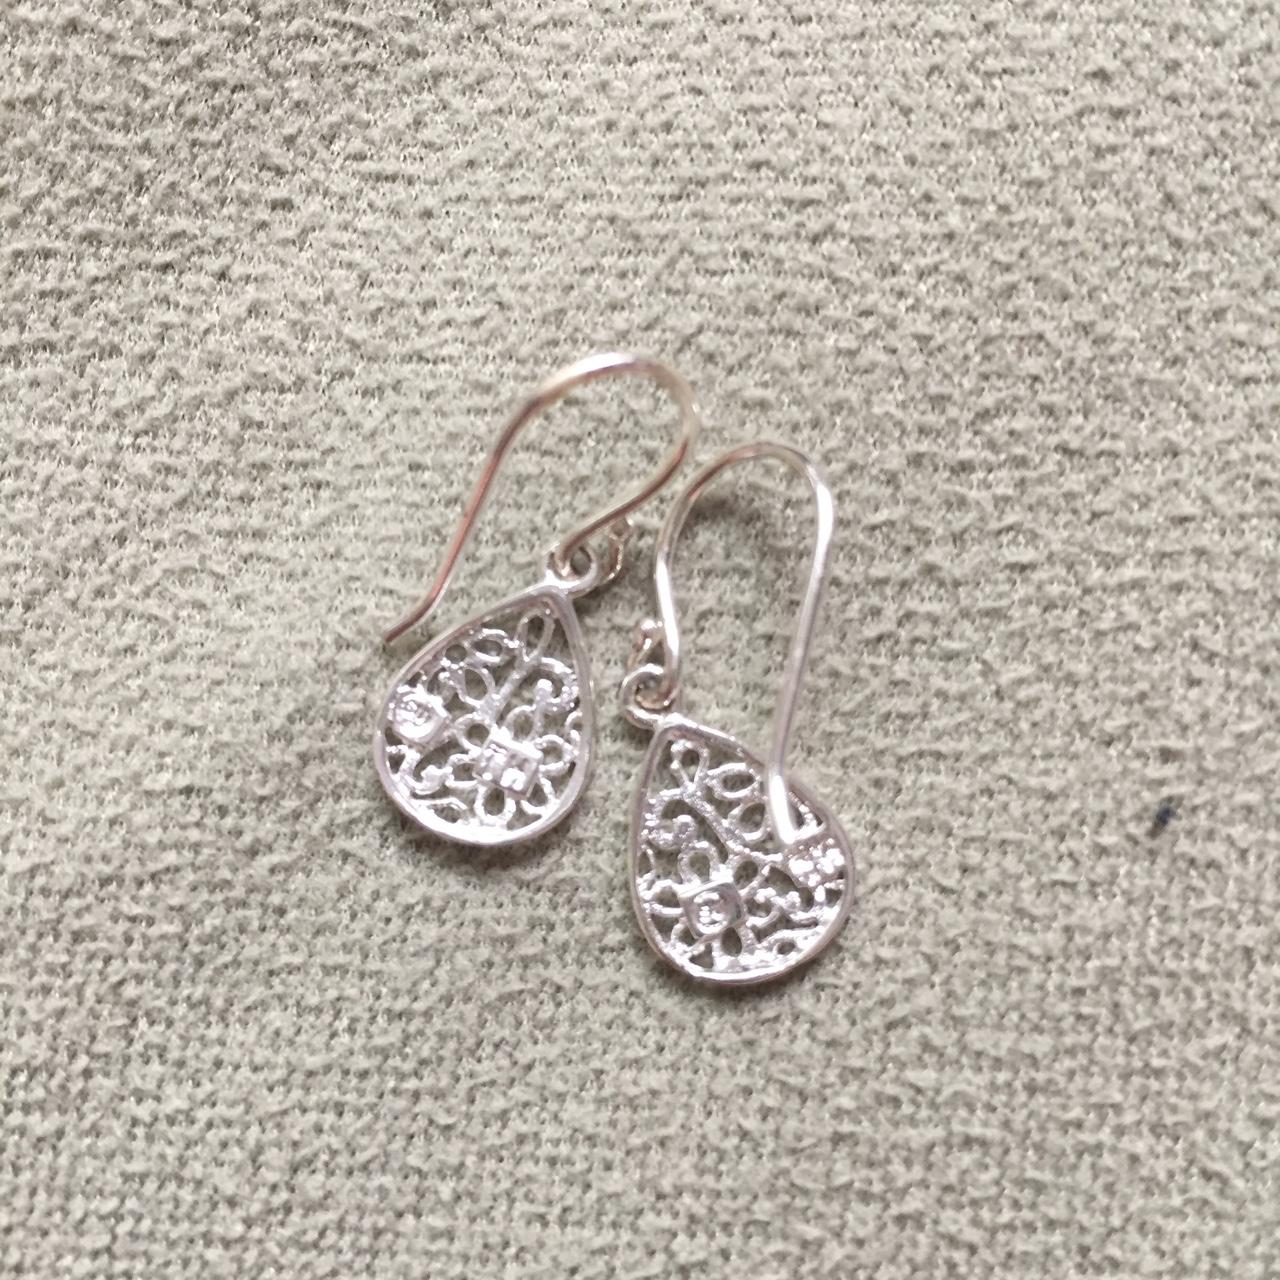 Product Image 2 - silver flower pear earrings, never